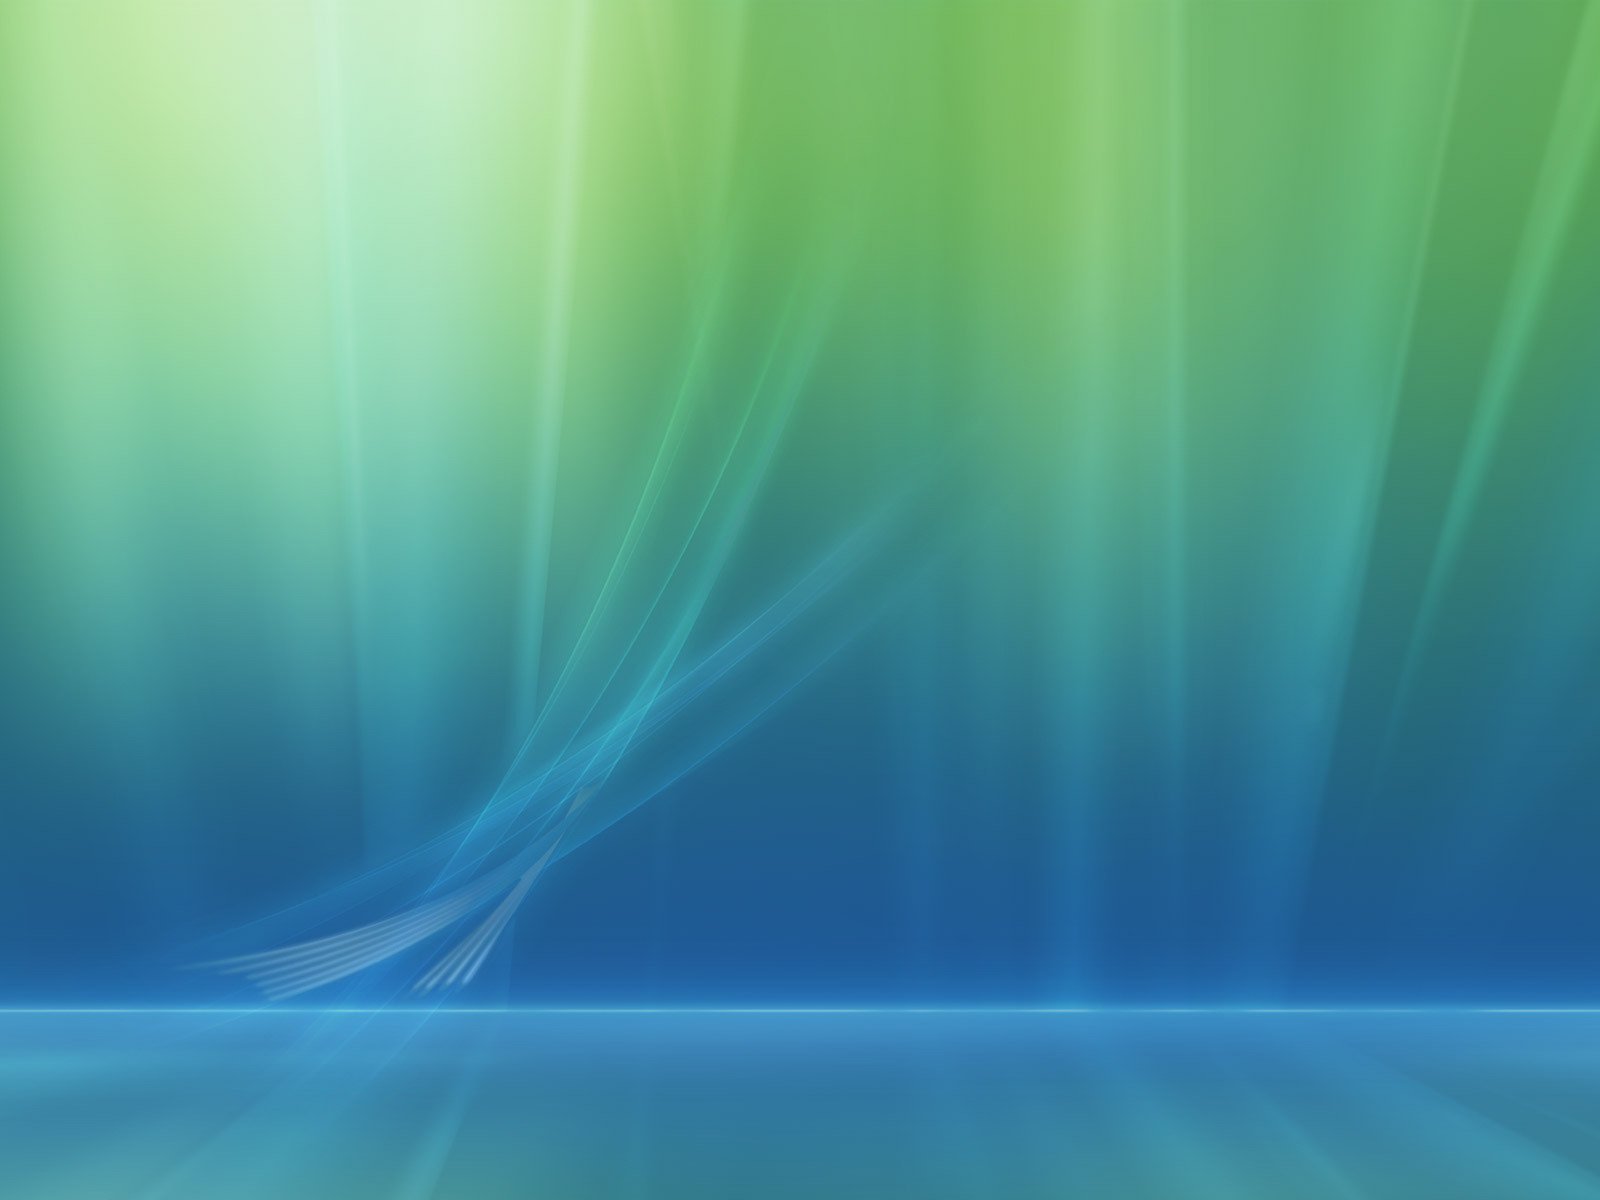 30 Latest Windows 7 Logon Screen Background Images Complete